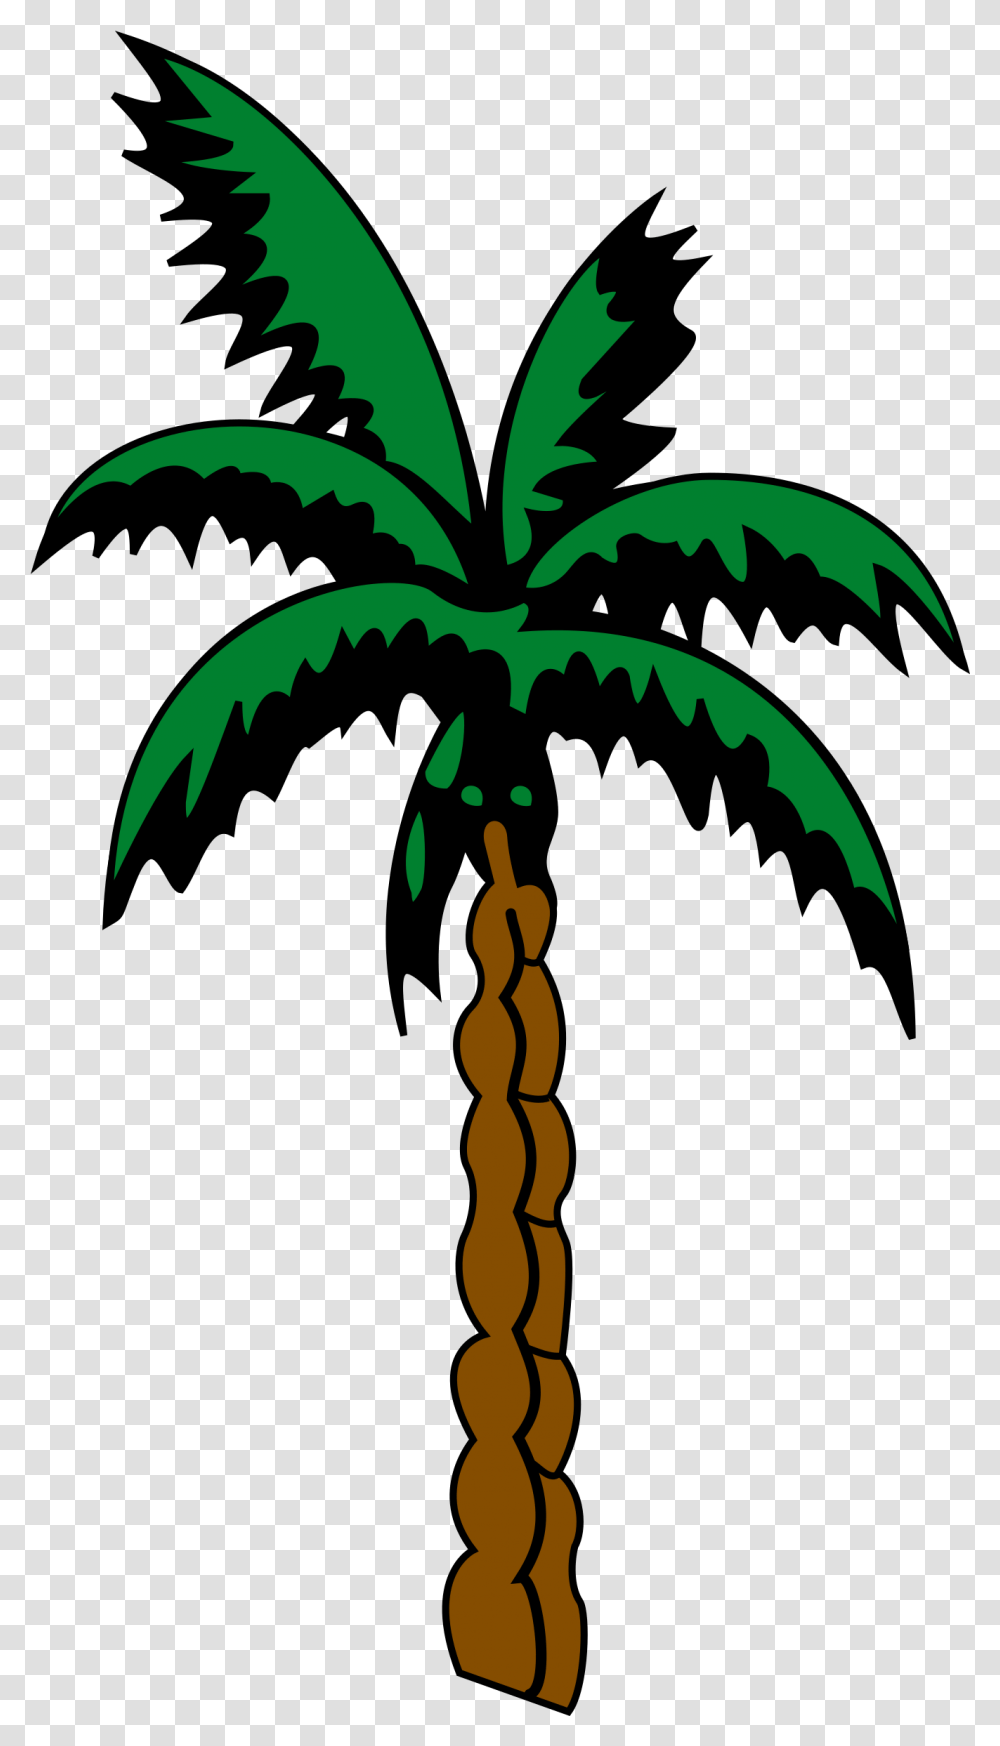 Free Icons Design Of Palm Tree Suriname Coat Of Arms, Plant, Leaf, Arecaceae, Green Transparent Png